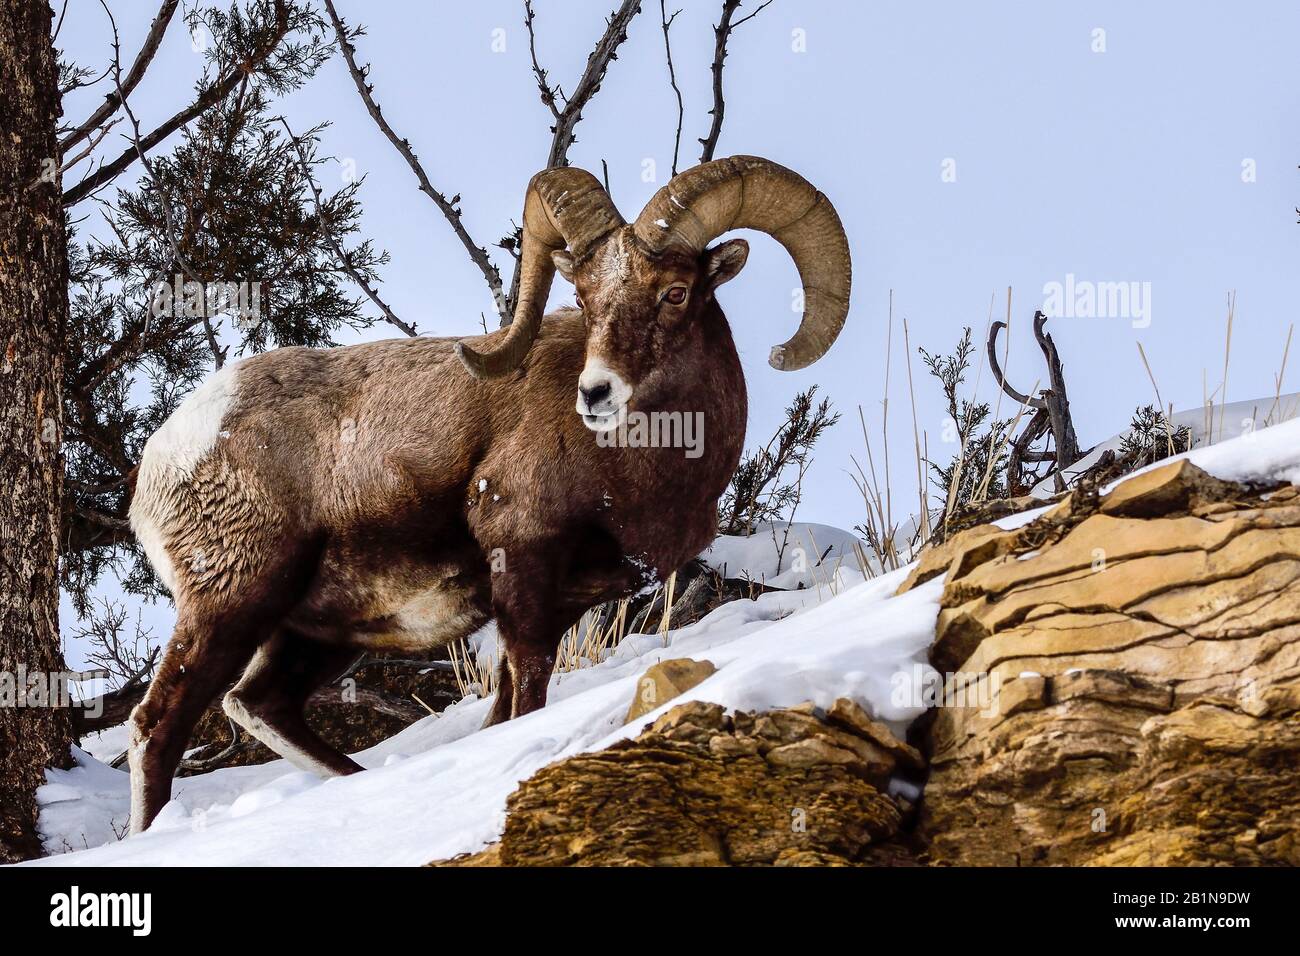 bighorn sheep, American bighorn, mountain sheep (Ovis canadensis), buck standing on a snow-covered rock, USA, Wyoming, Yellowstone National Park Stock Photo